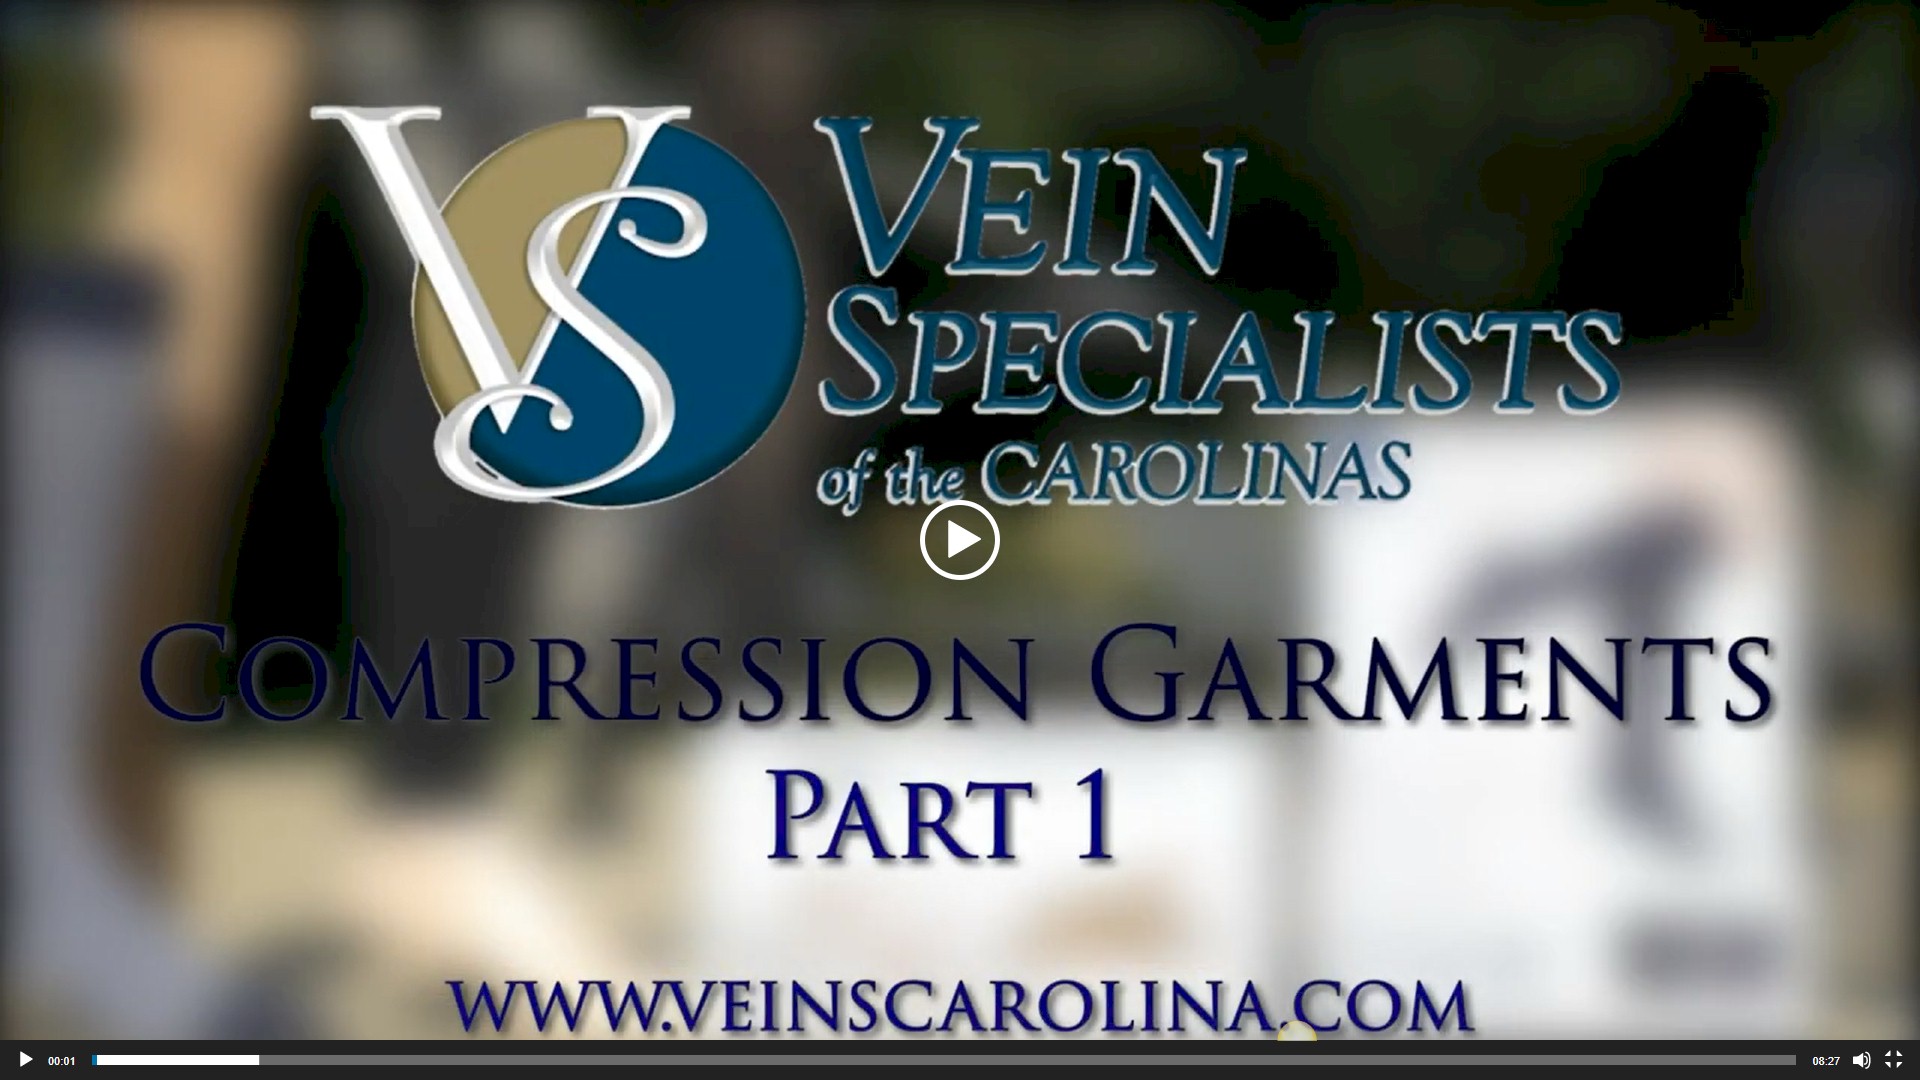 Why are Compression Garments Necessary To Treat Varicose Veins?